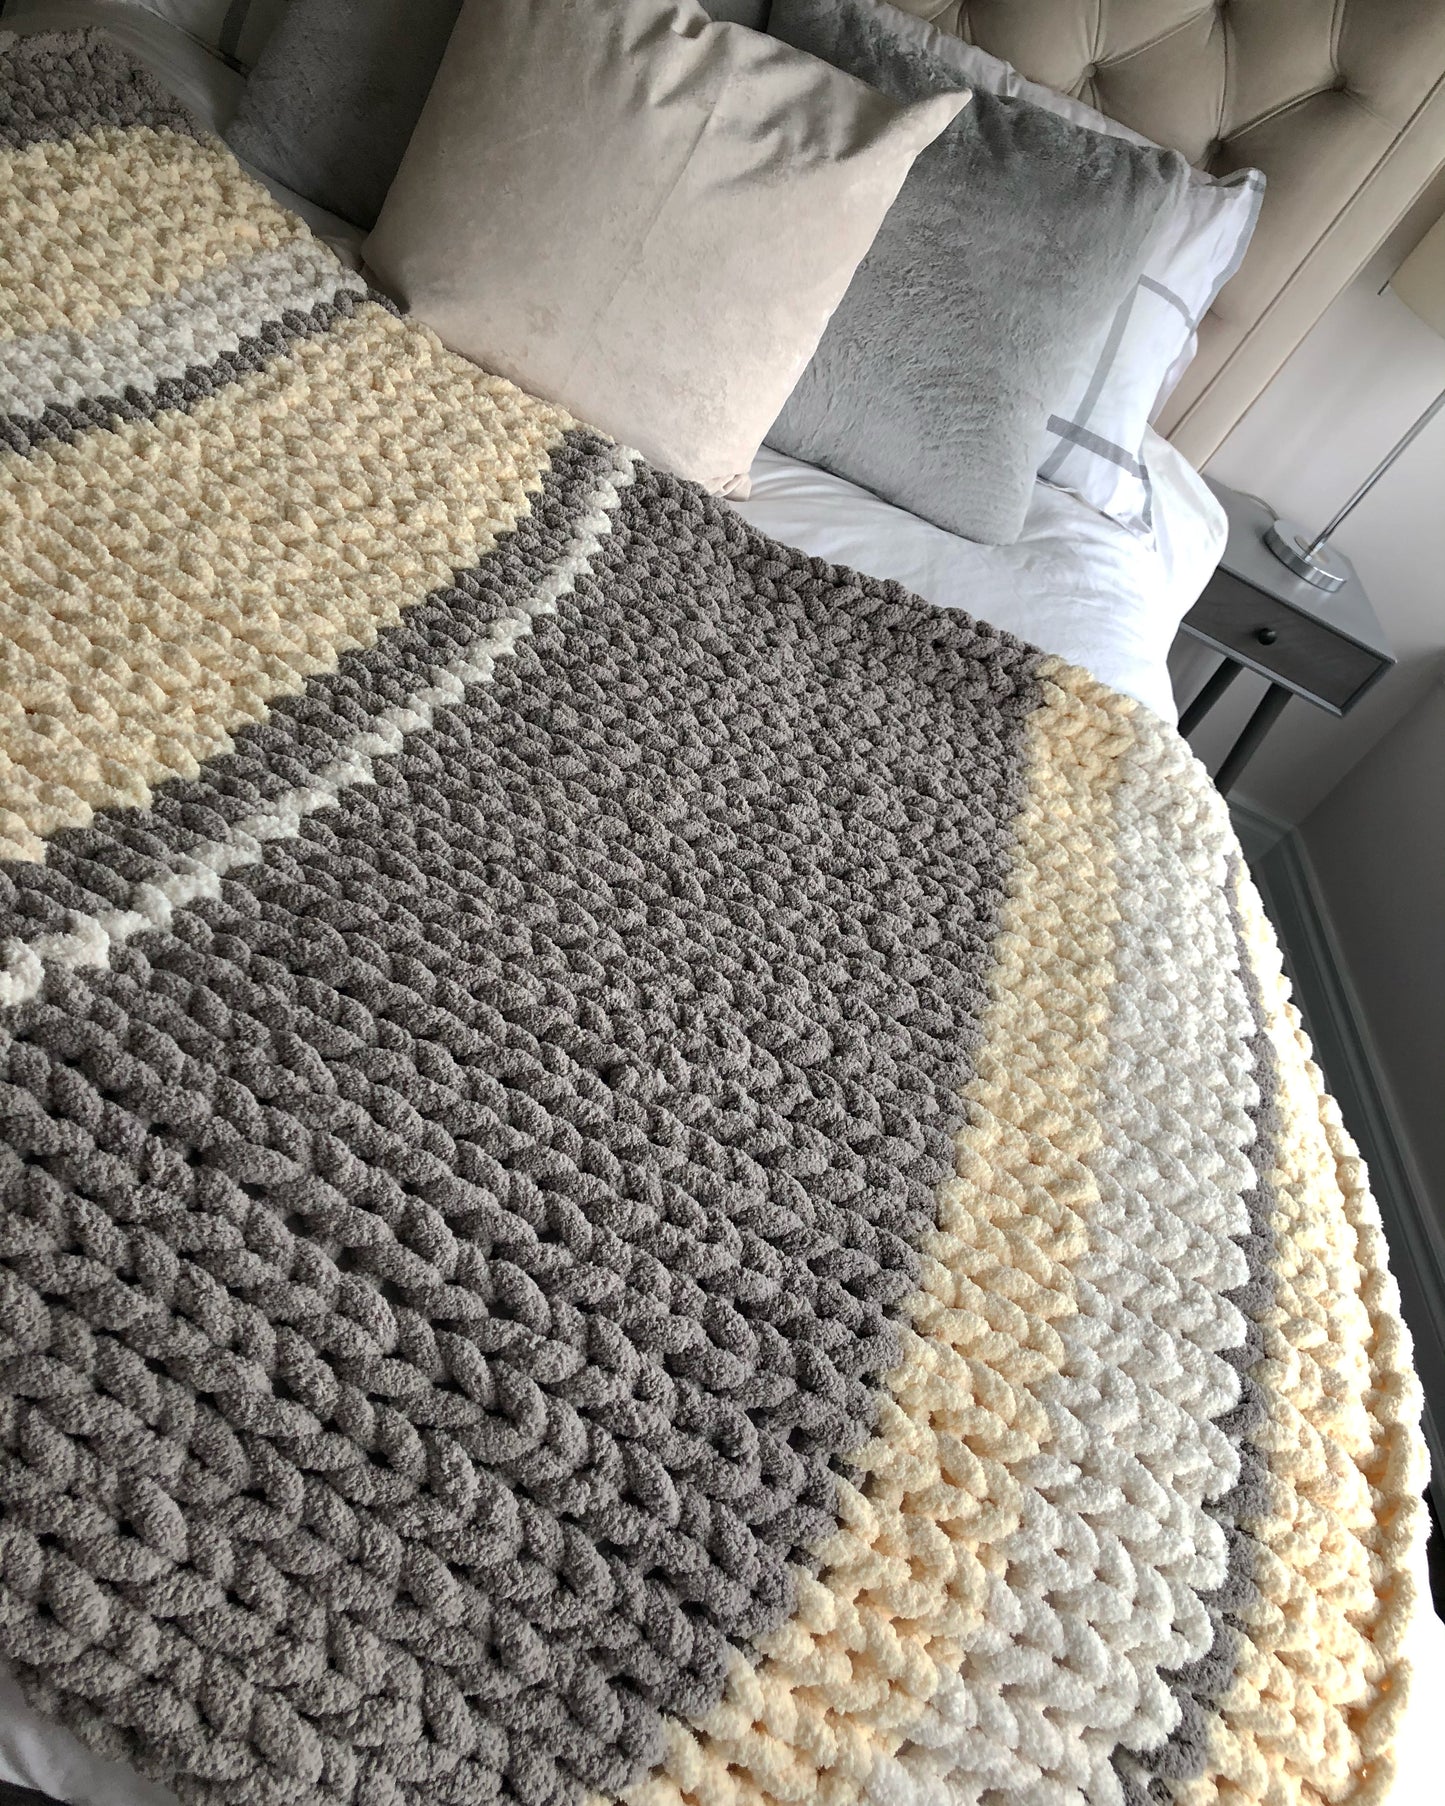 Healing Hand, Chunky Knit Blankets Butter Yellow and Pale Grey Striped